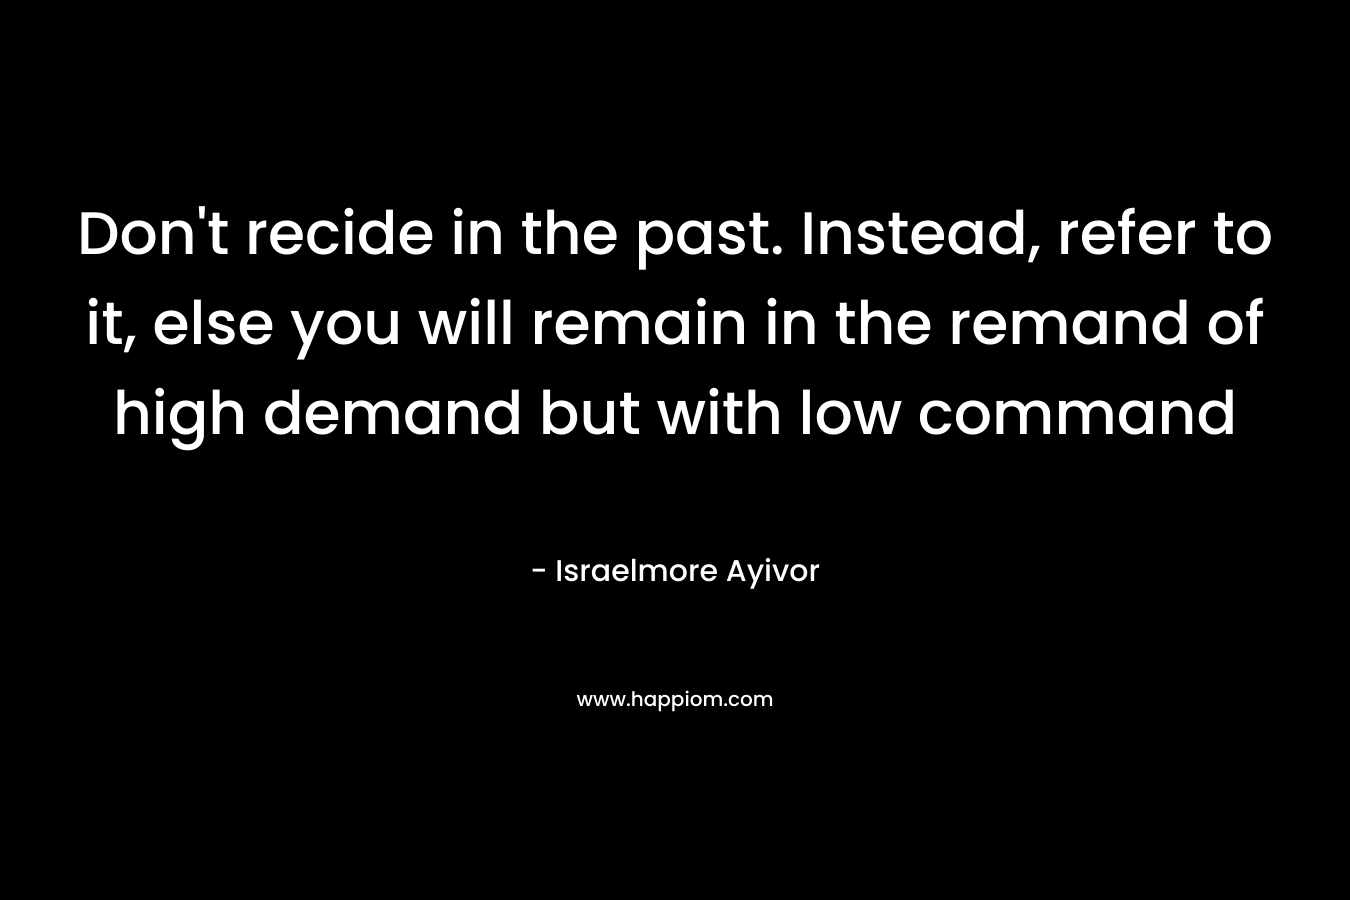 Don't recide in the past. Instead, refer to it, else you will remain in the remand of high demand but with low command